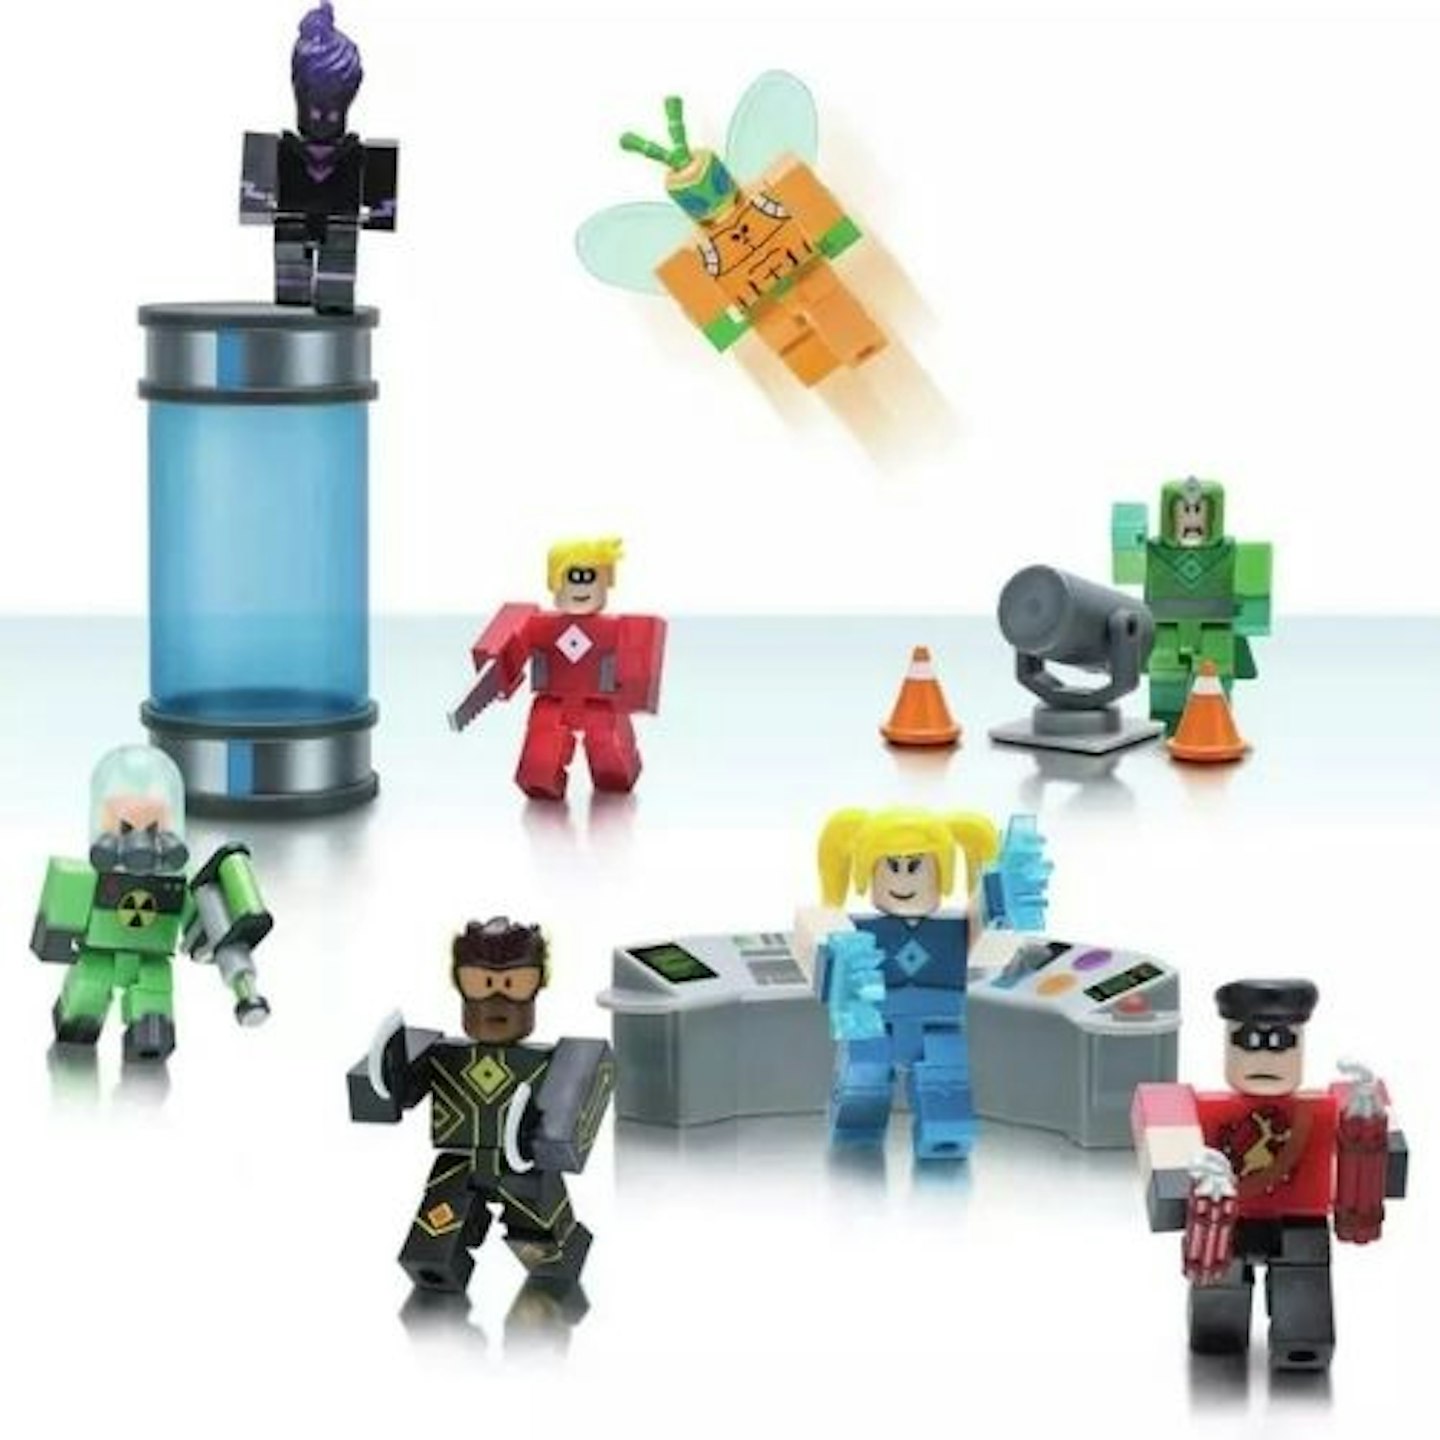 Roblox Heroes of Roblox Playset